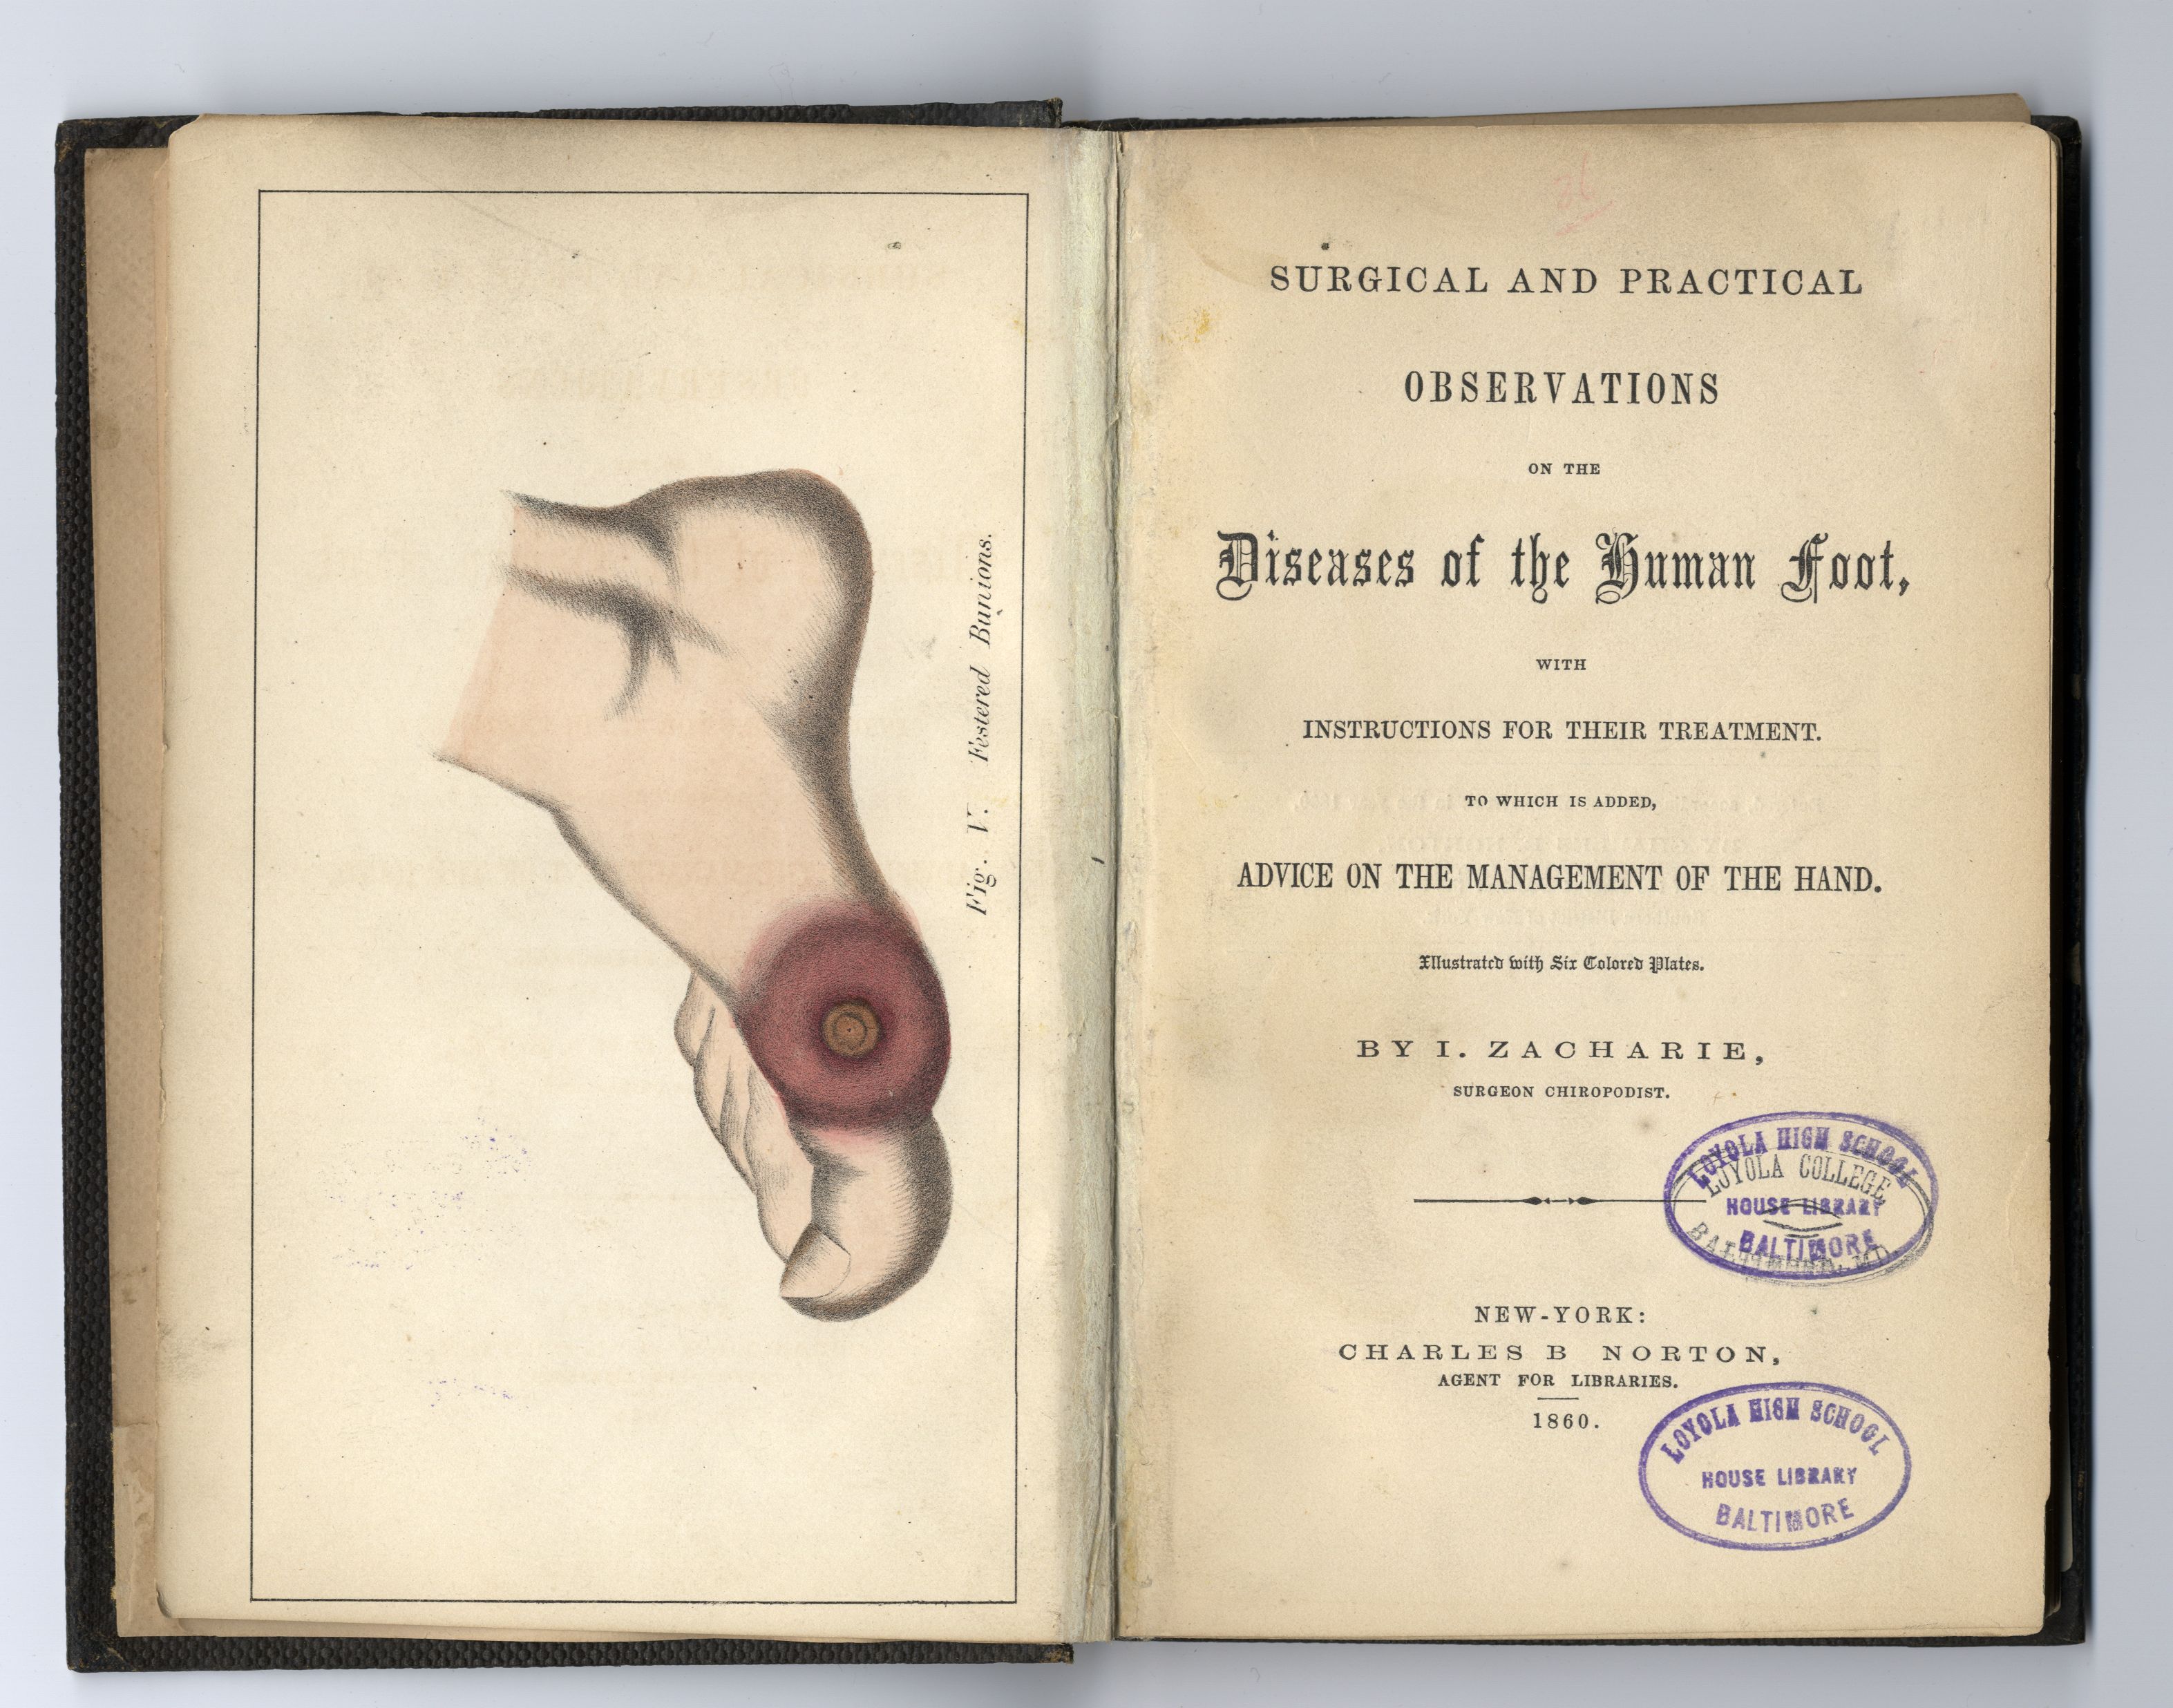 Rare Signed Copy of Lincoln's Jewish Chiropodist and Spy, Dr. Issachar Zacharie's Book